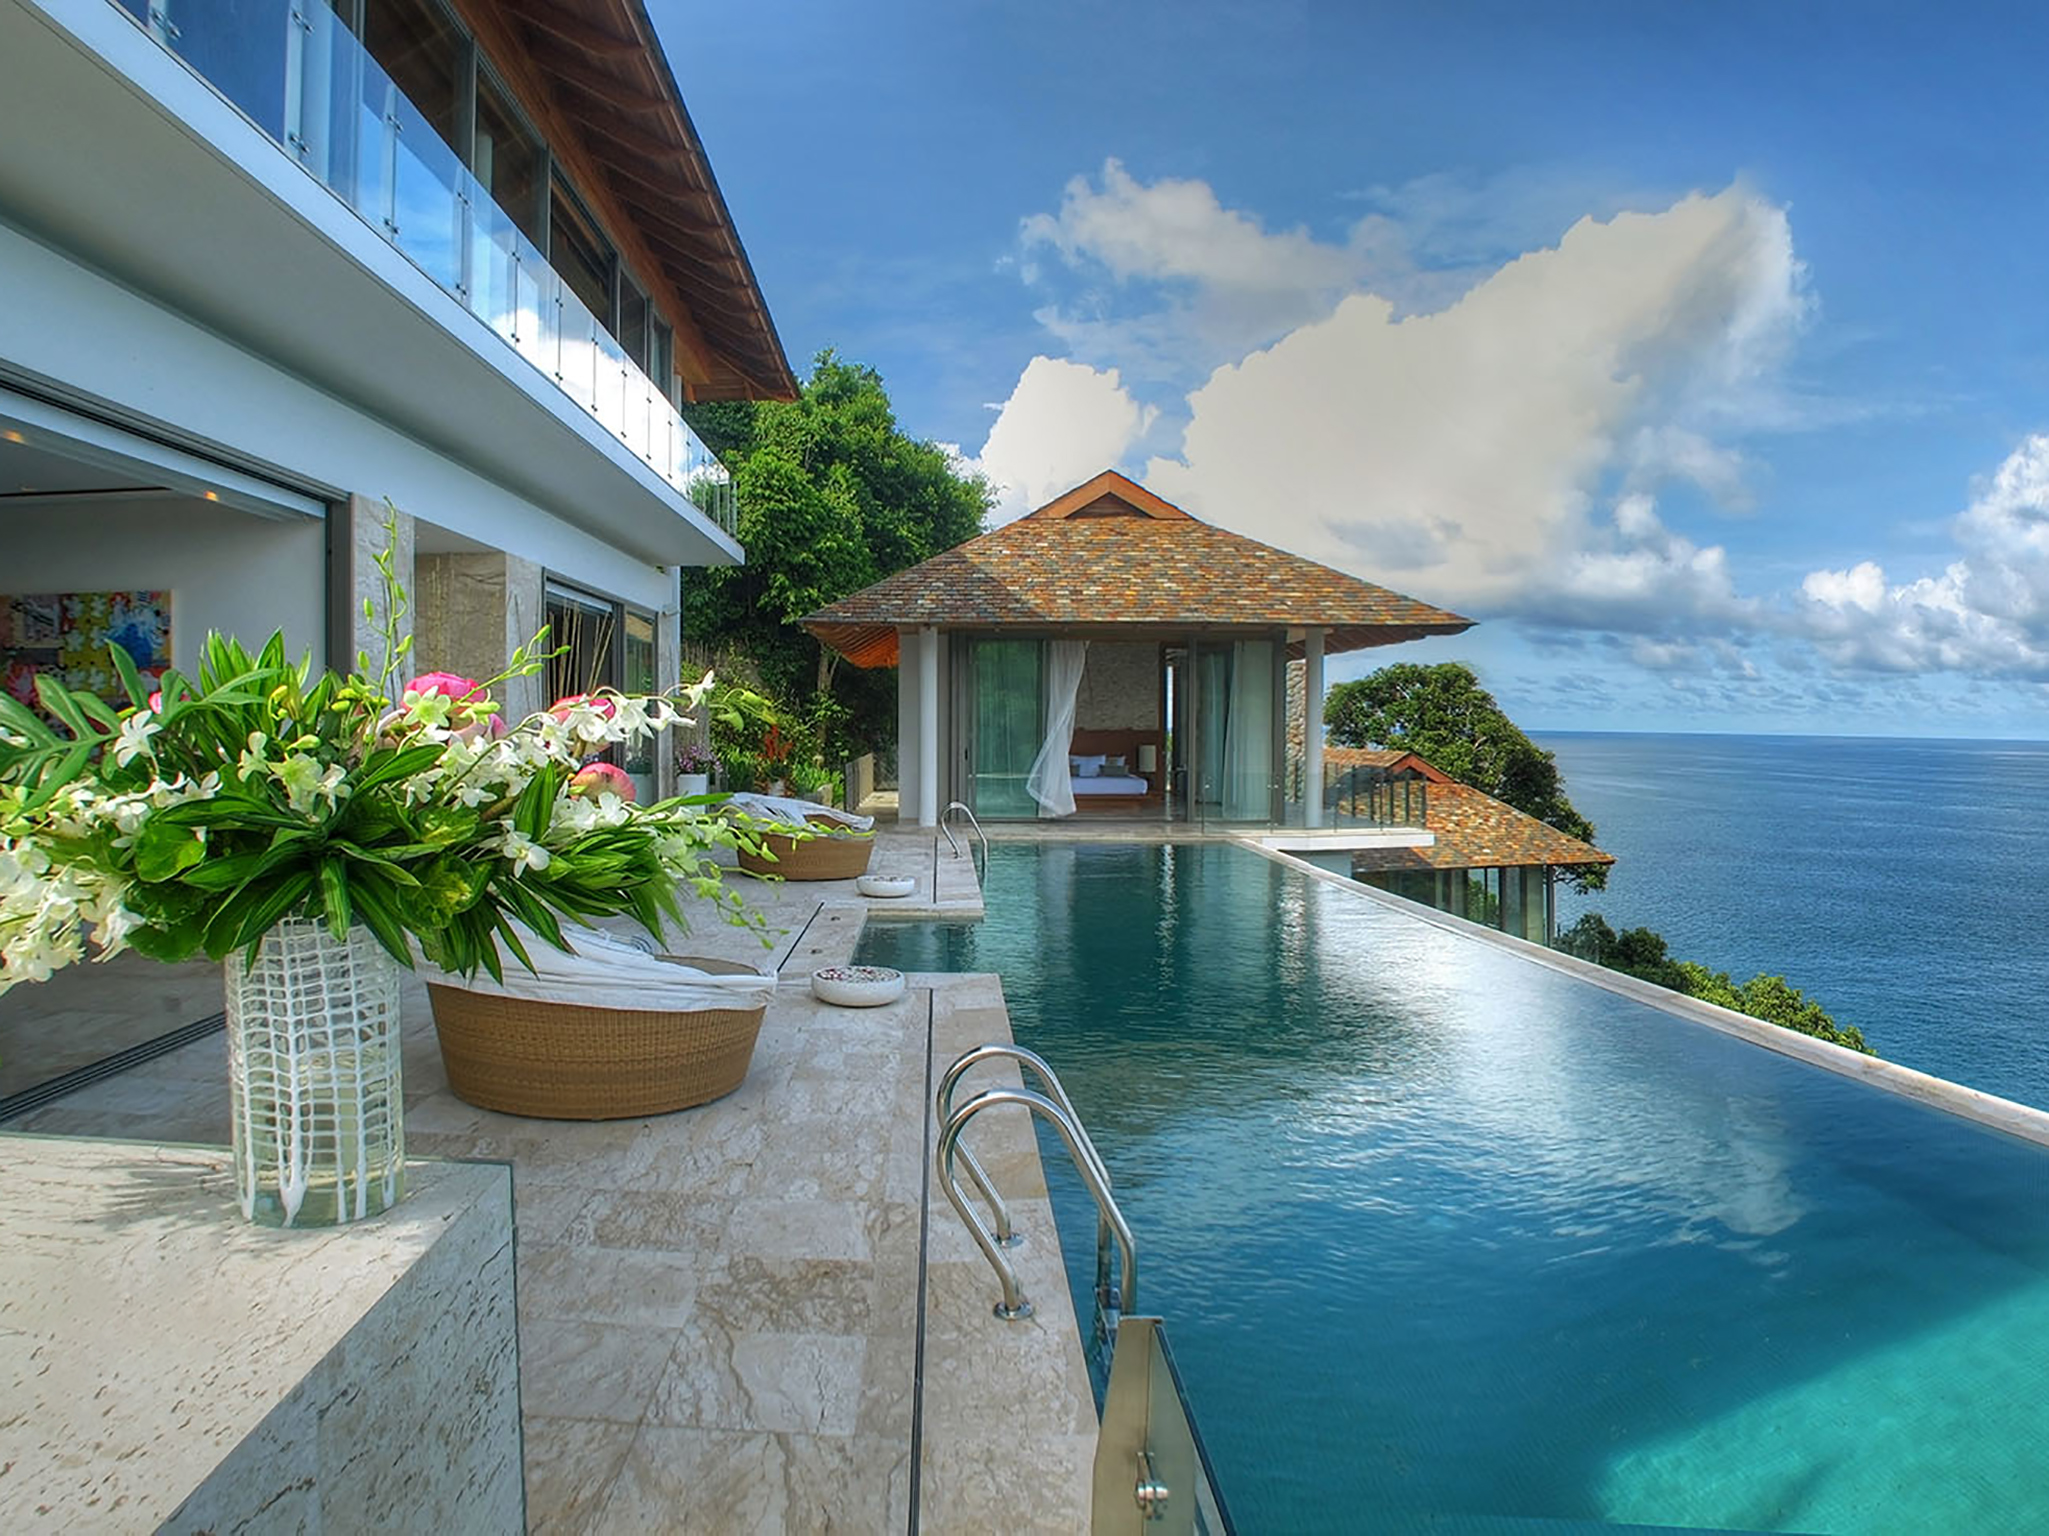 Villa Minh - From the pool edge